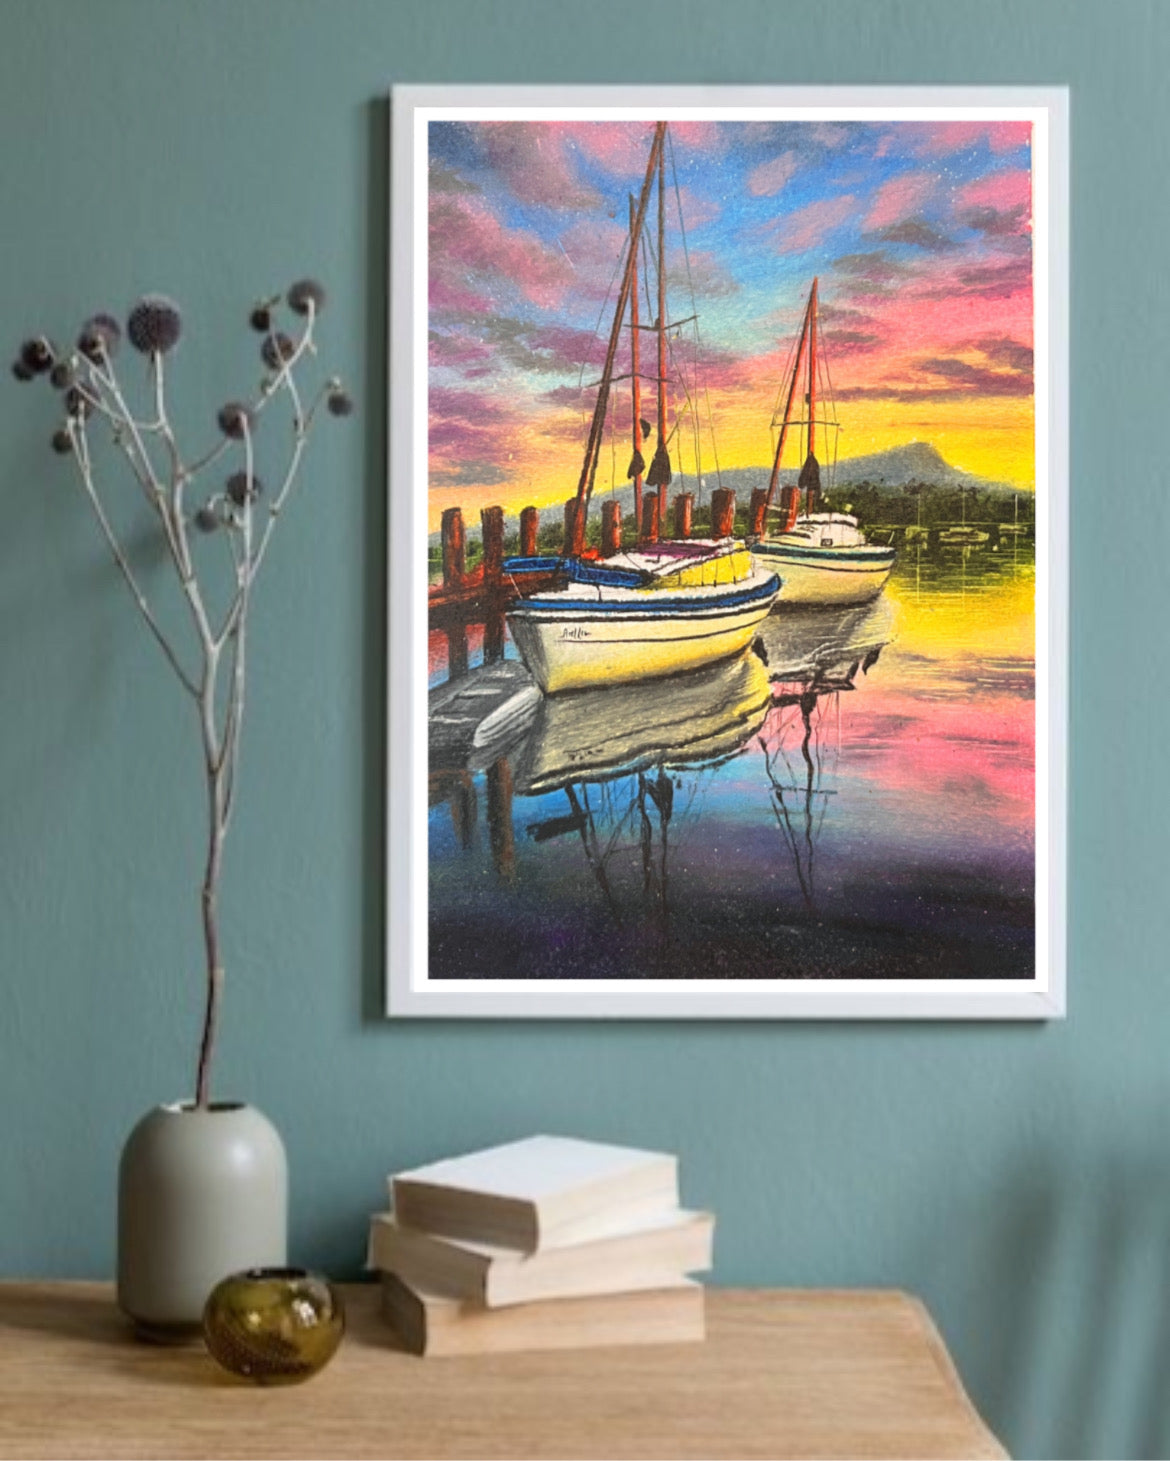 Serenity on the River: Colorful Boat Scenery - Original Painting by Bhushita